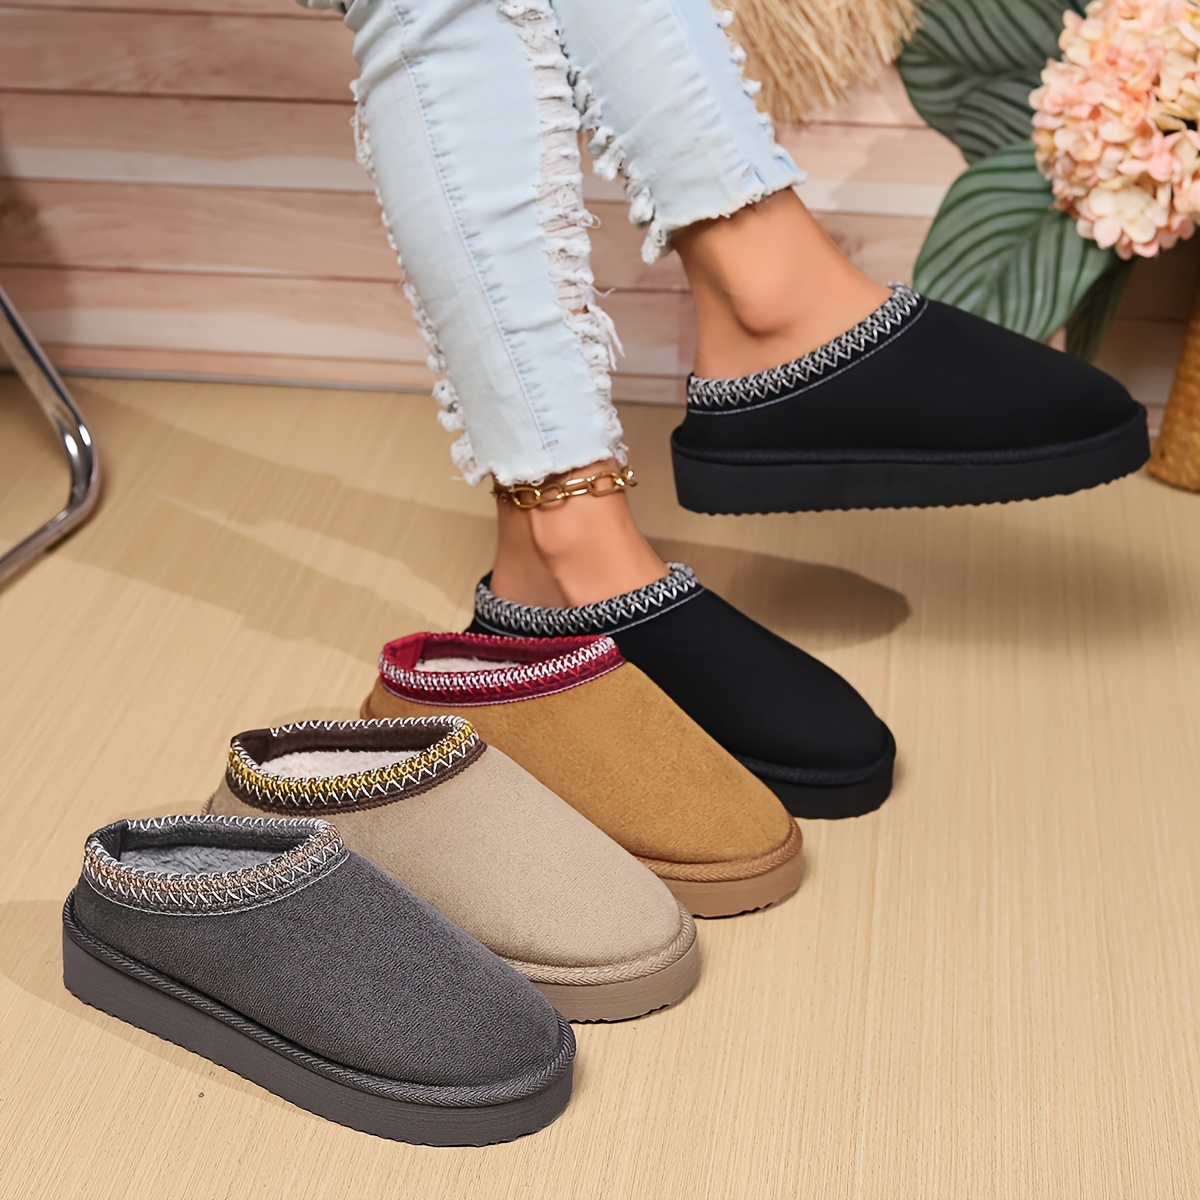 

Women's Indoor Warm Slippers With Soft Anti-slip Sole, Winter Ankle Boots, Cozy House Shoes